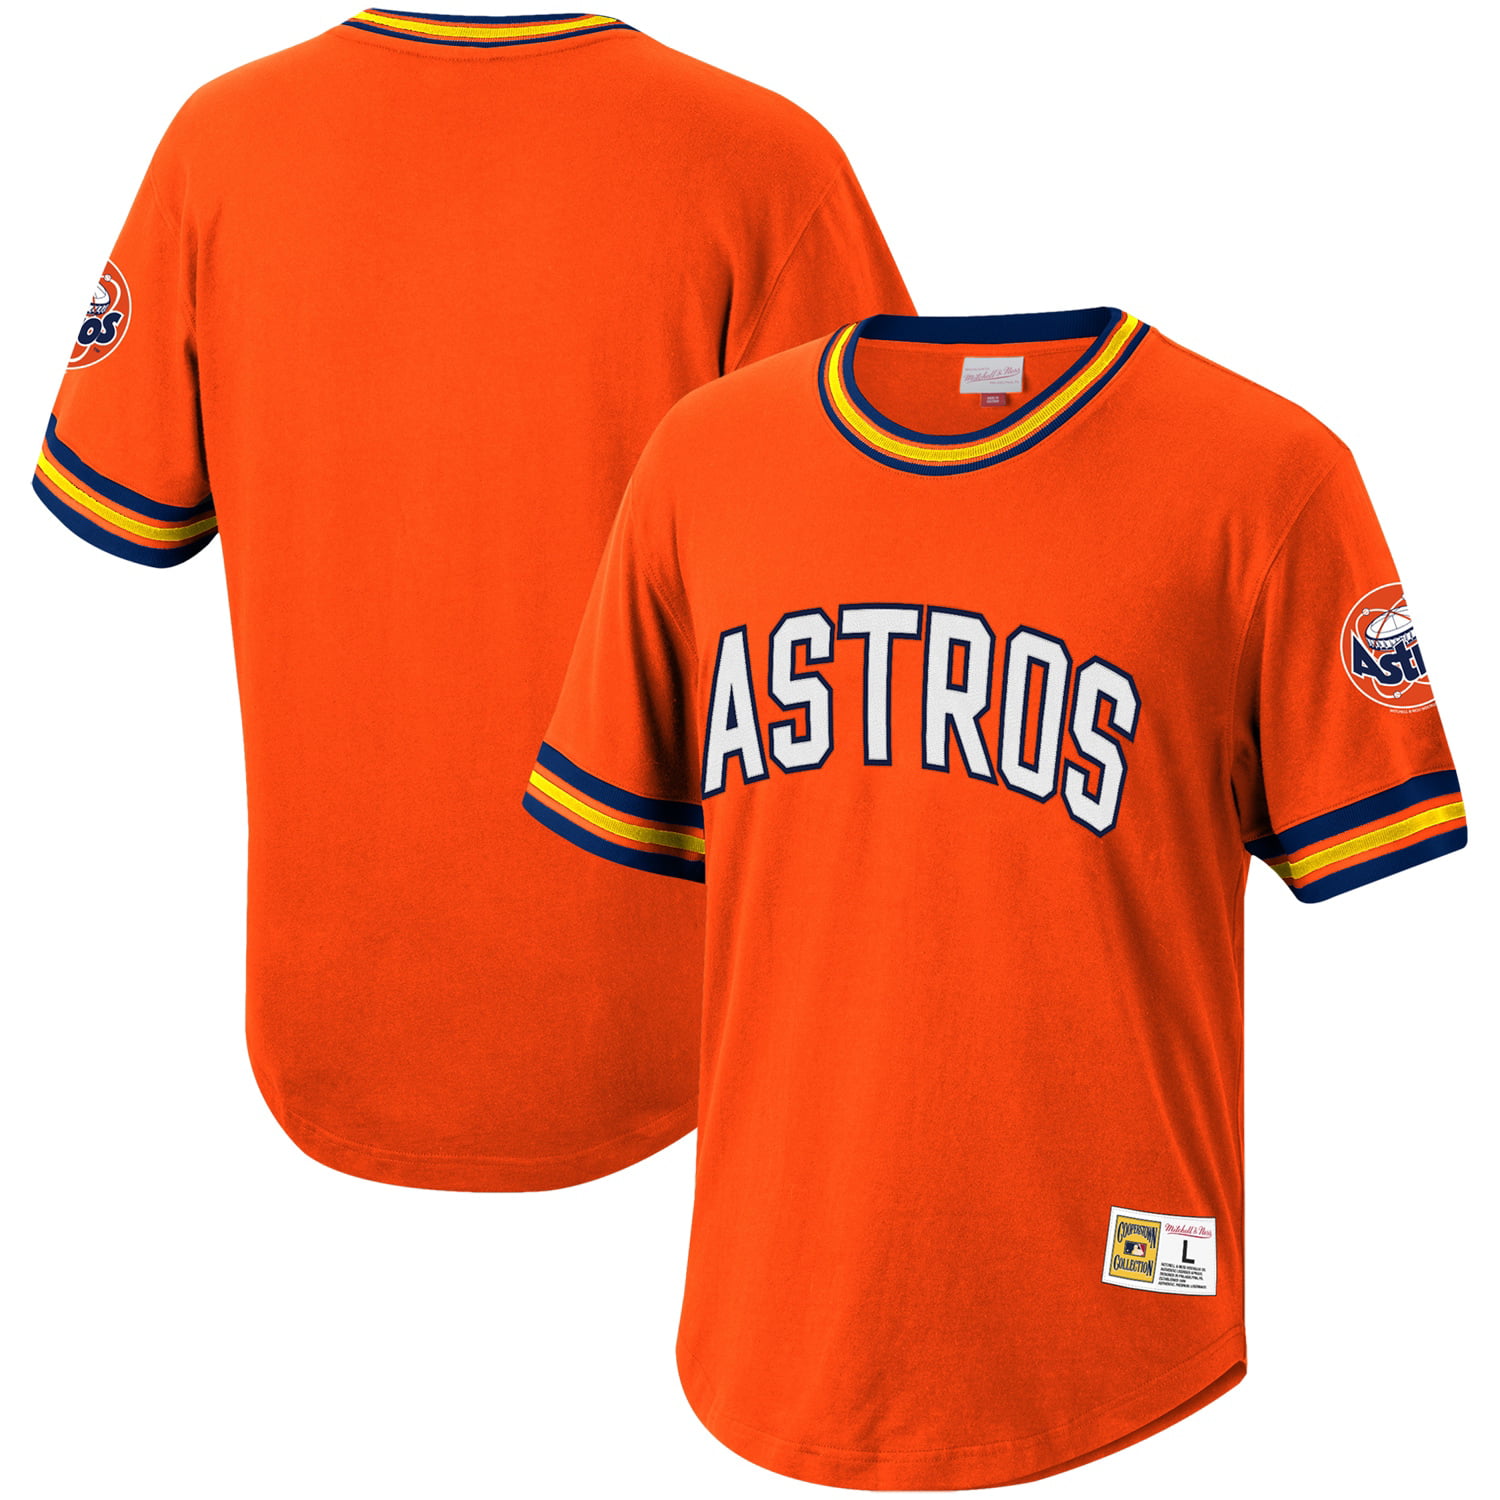 old astros jersey